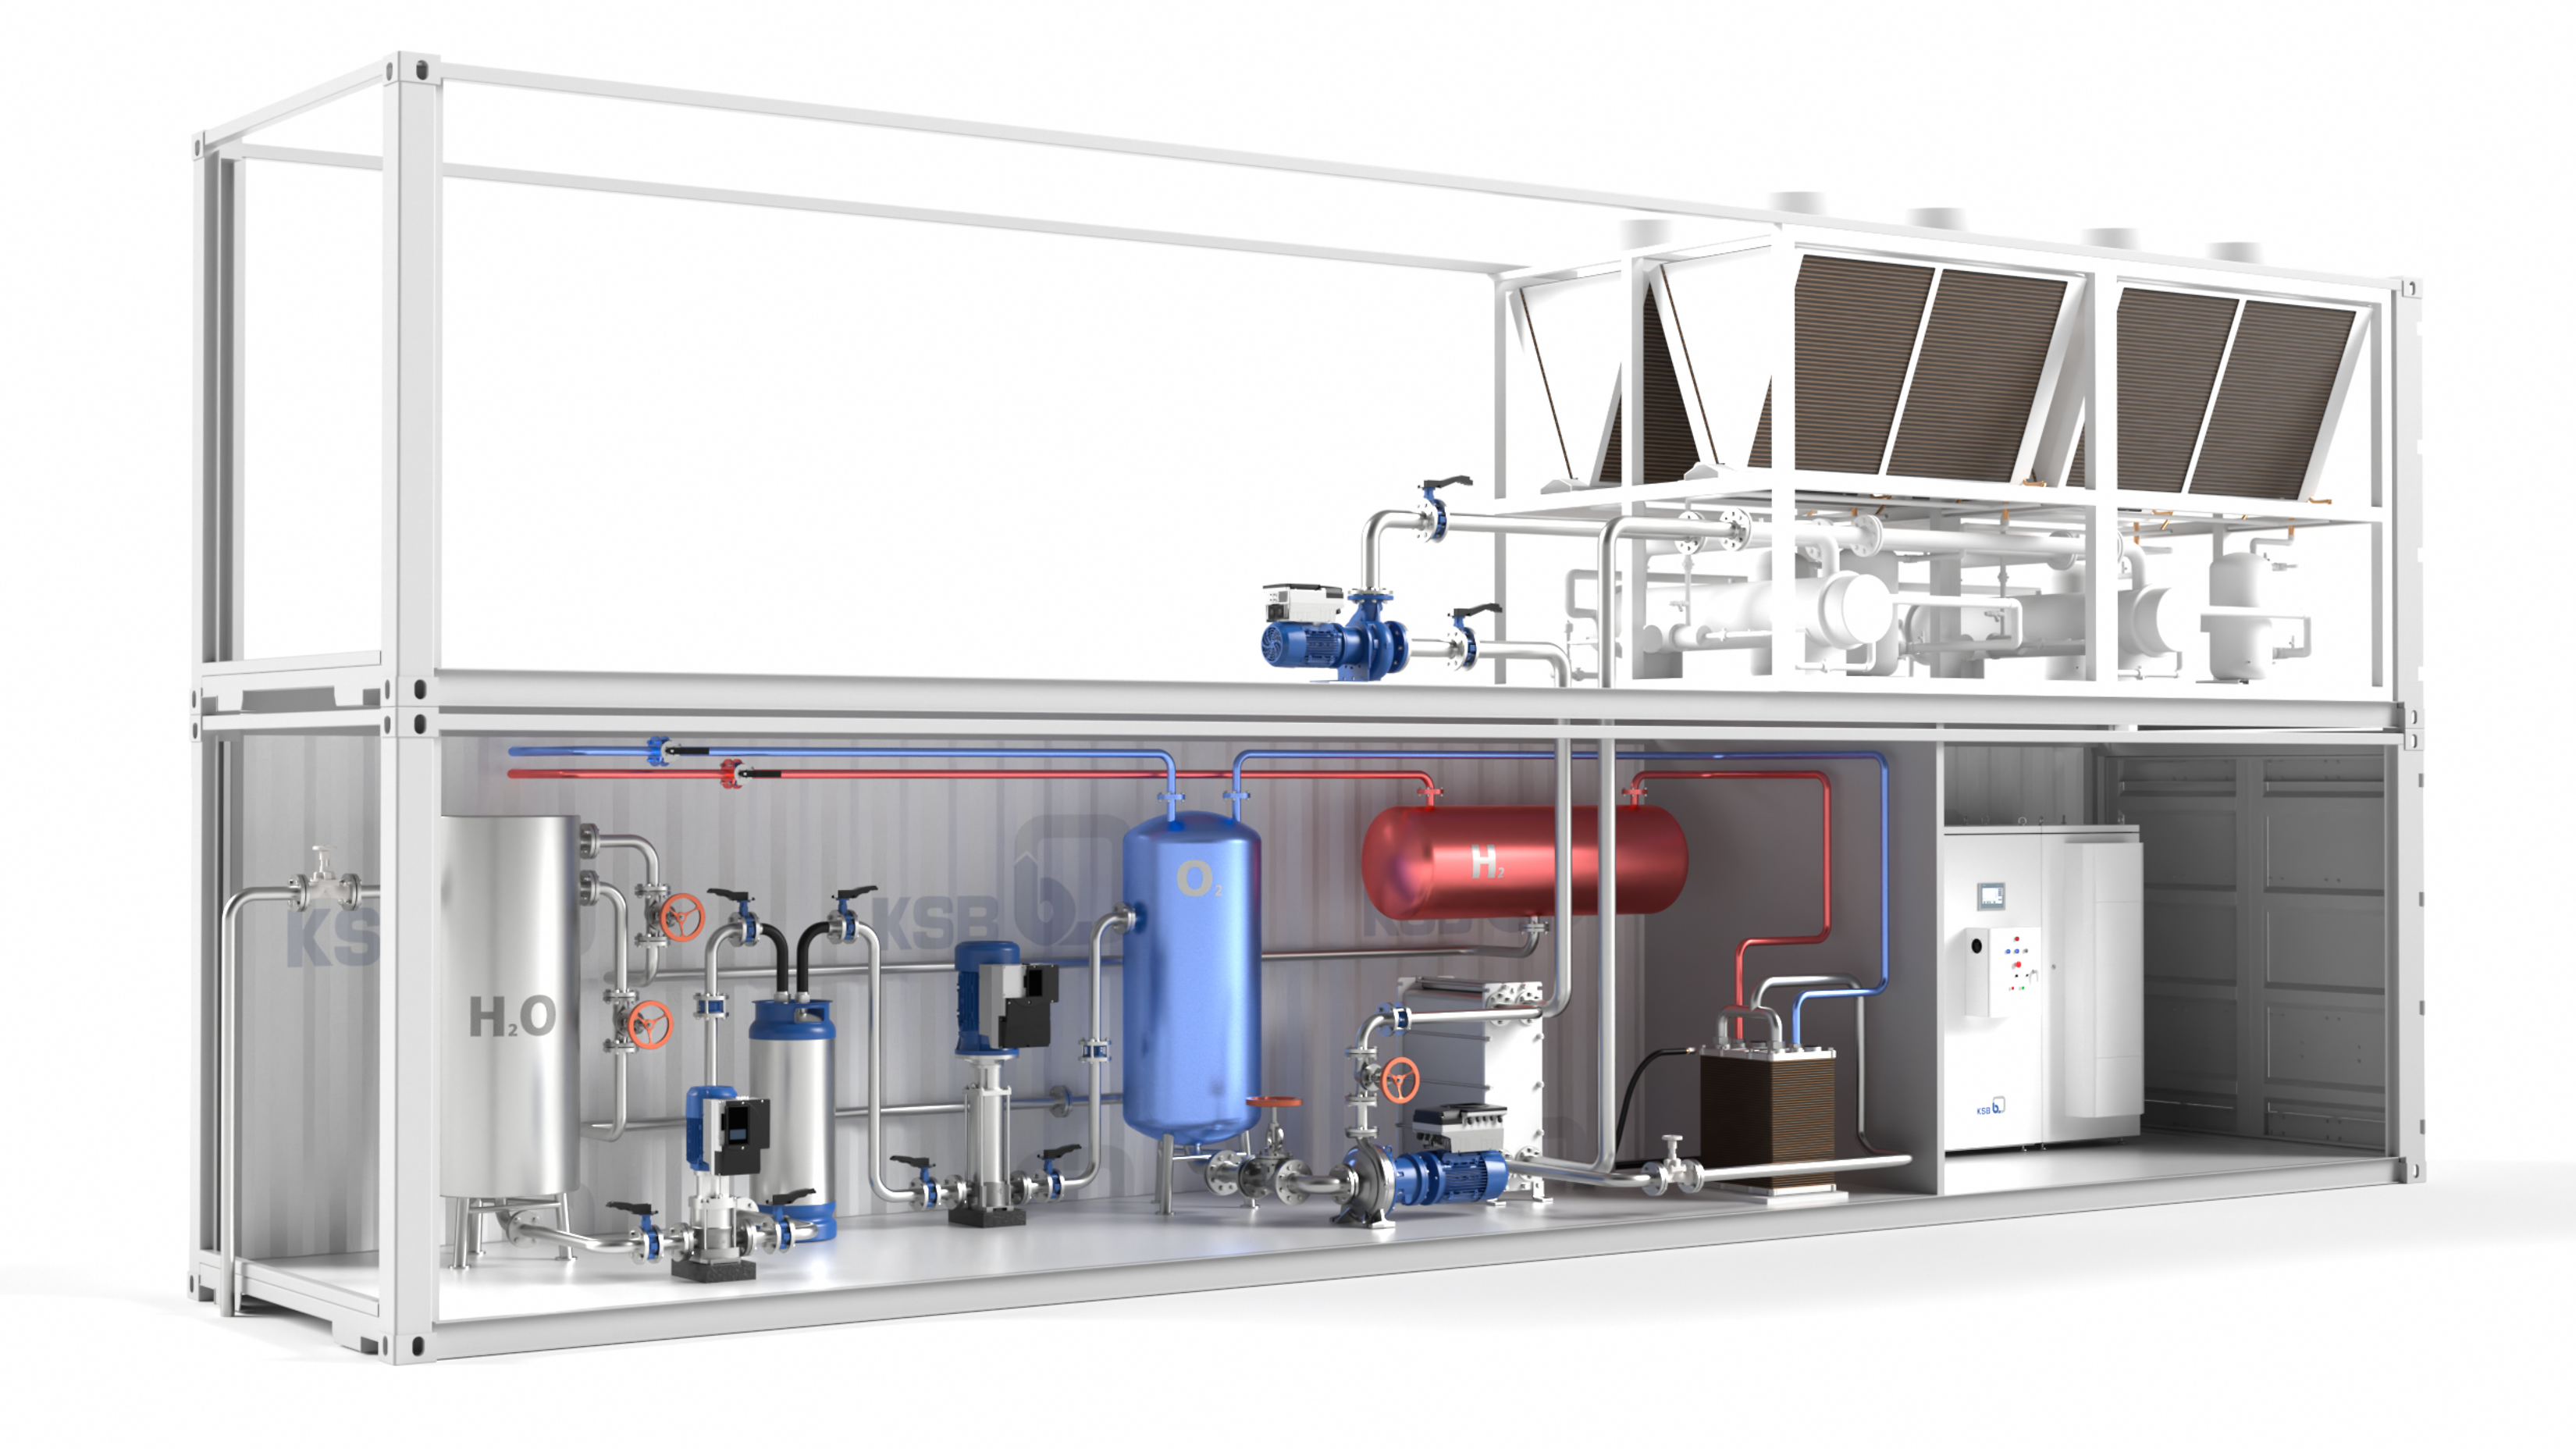 Rendered image of a hydrogen electrolyser as a container solution with KSB pumps and valves